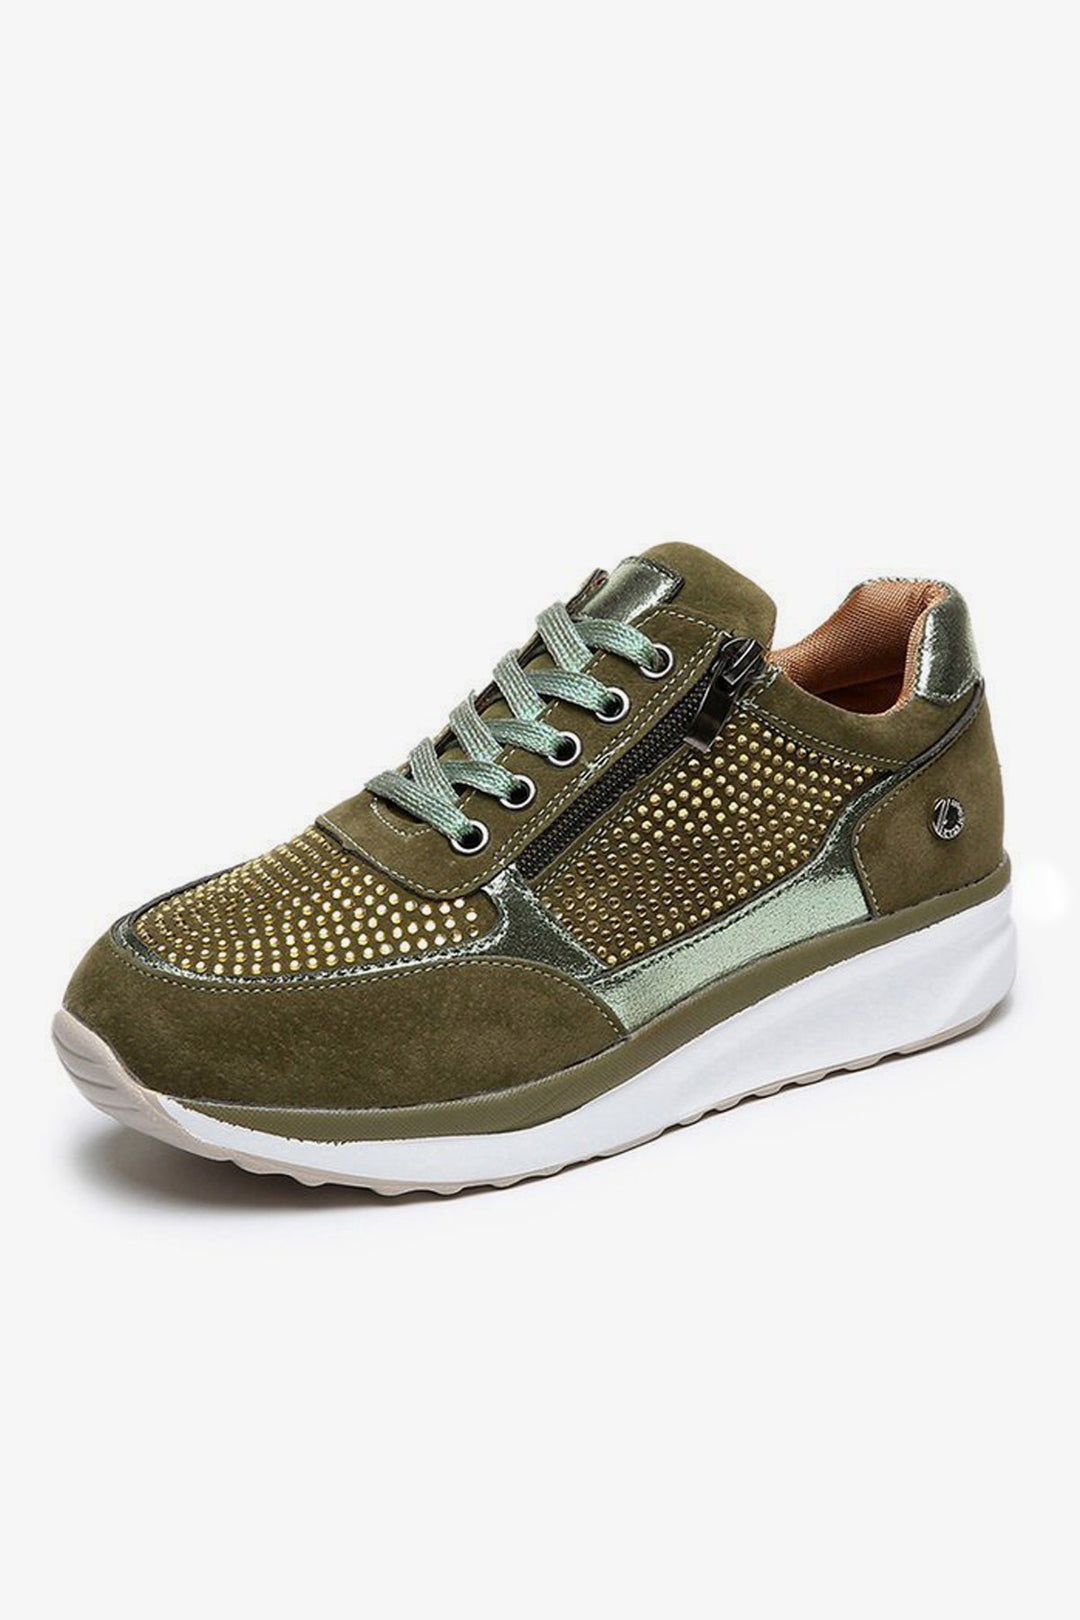 Green Sparking Casual Sneakers - S22 - WFW0003